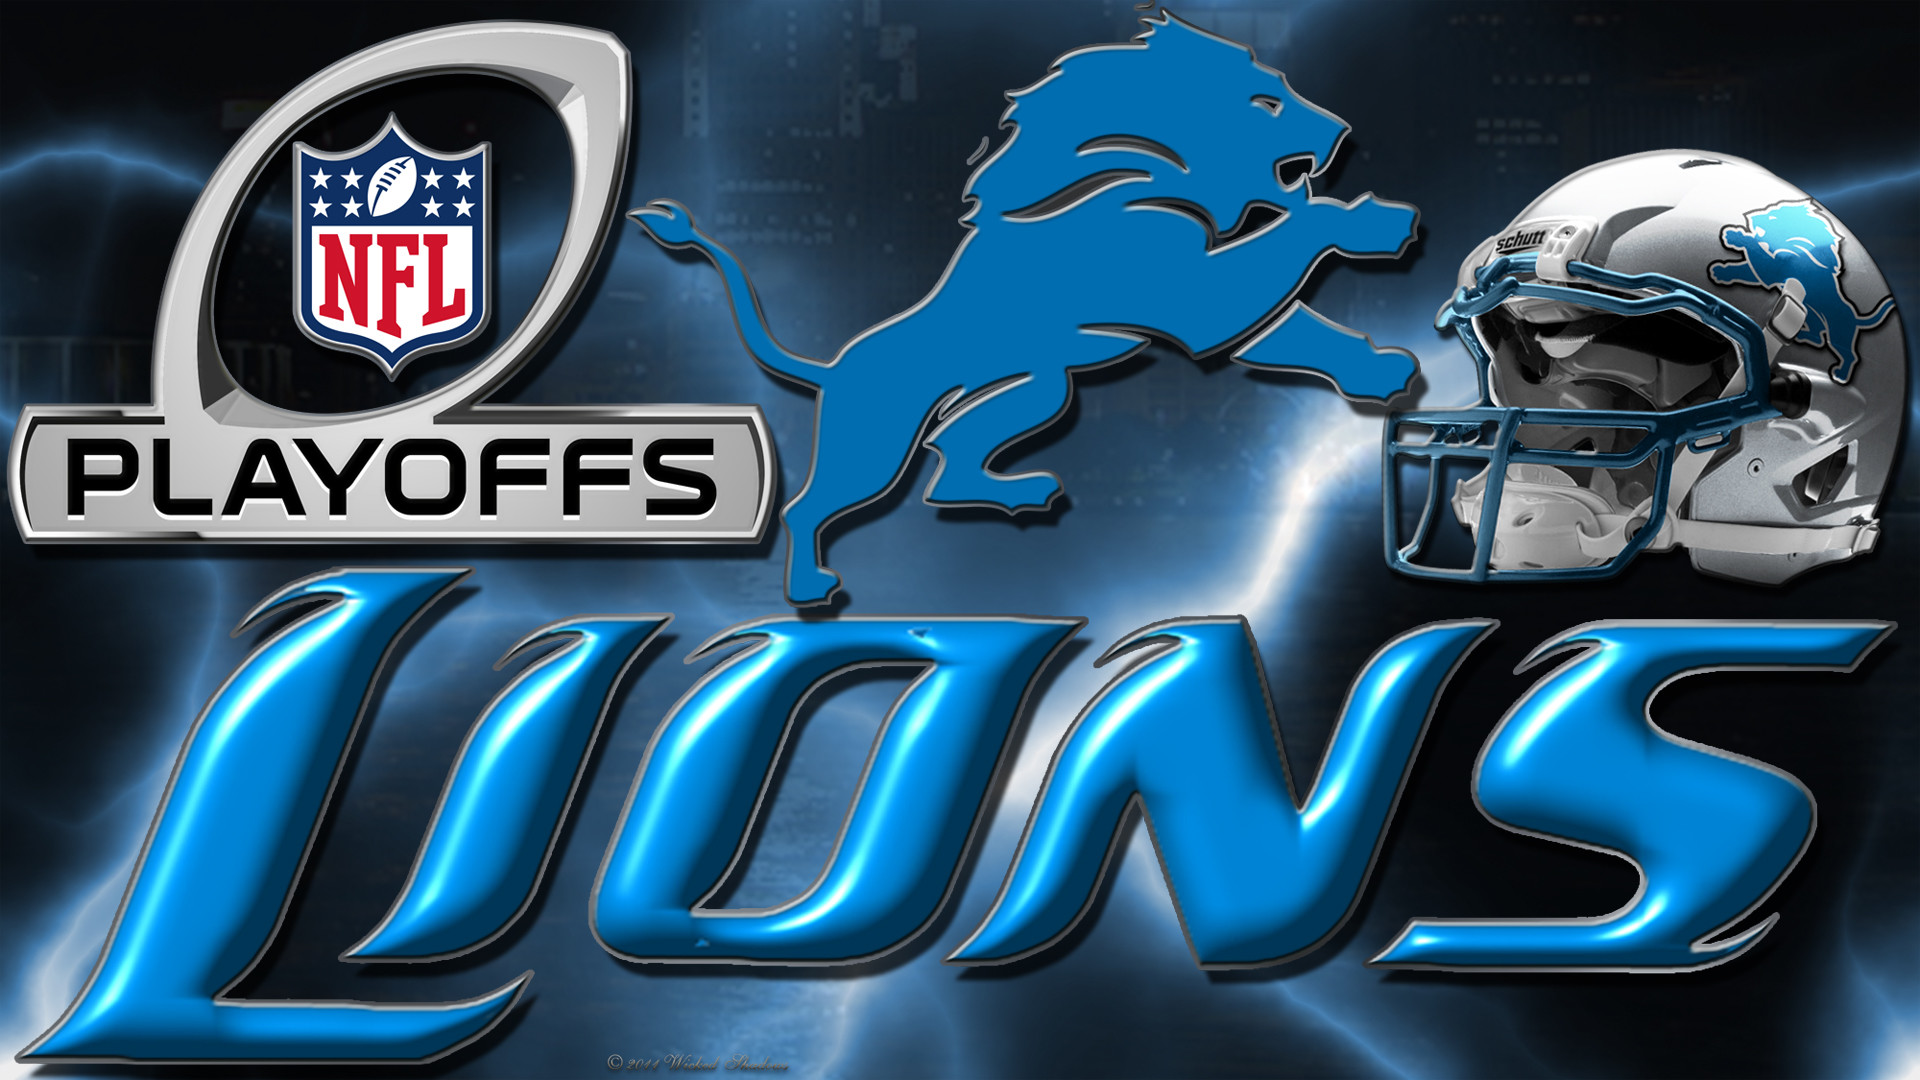 1920x1080 Wallpapers By Wicked Shadows: Detroit Lions 2012 Playoffs Wallpaper